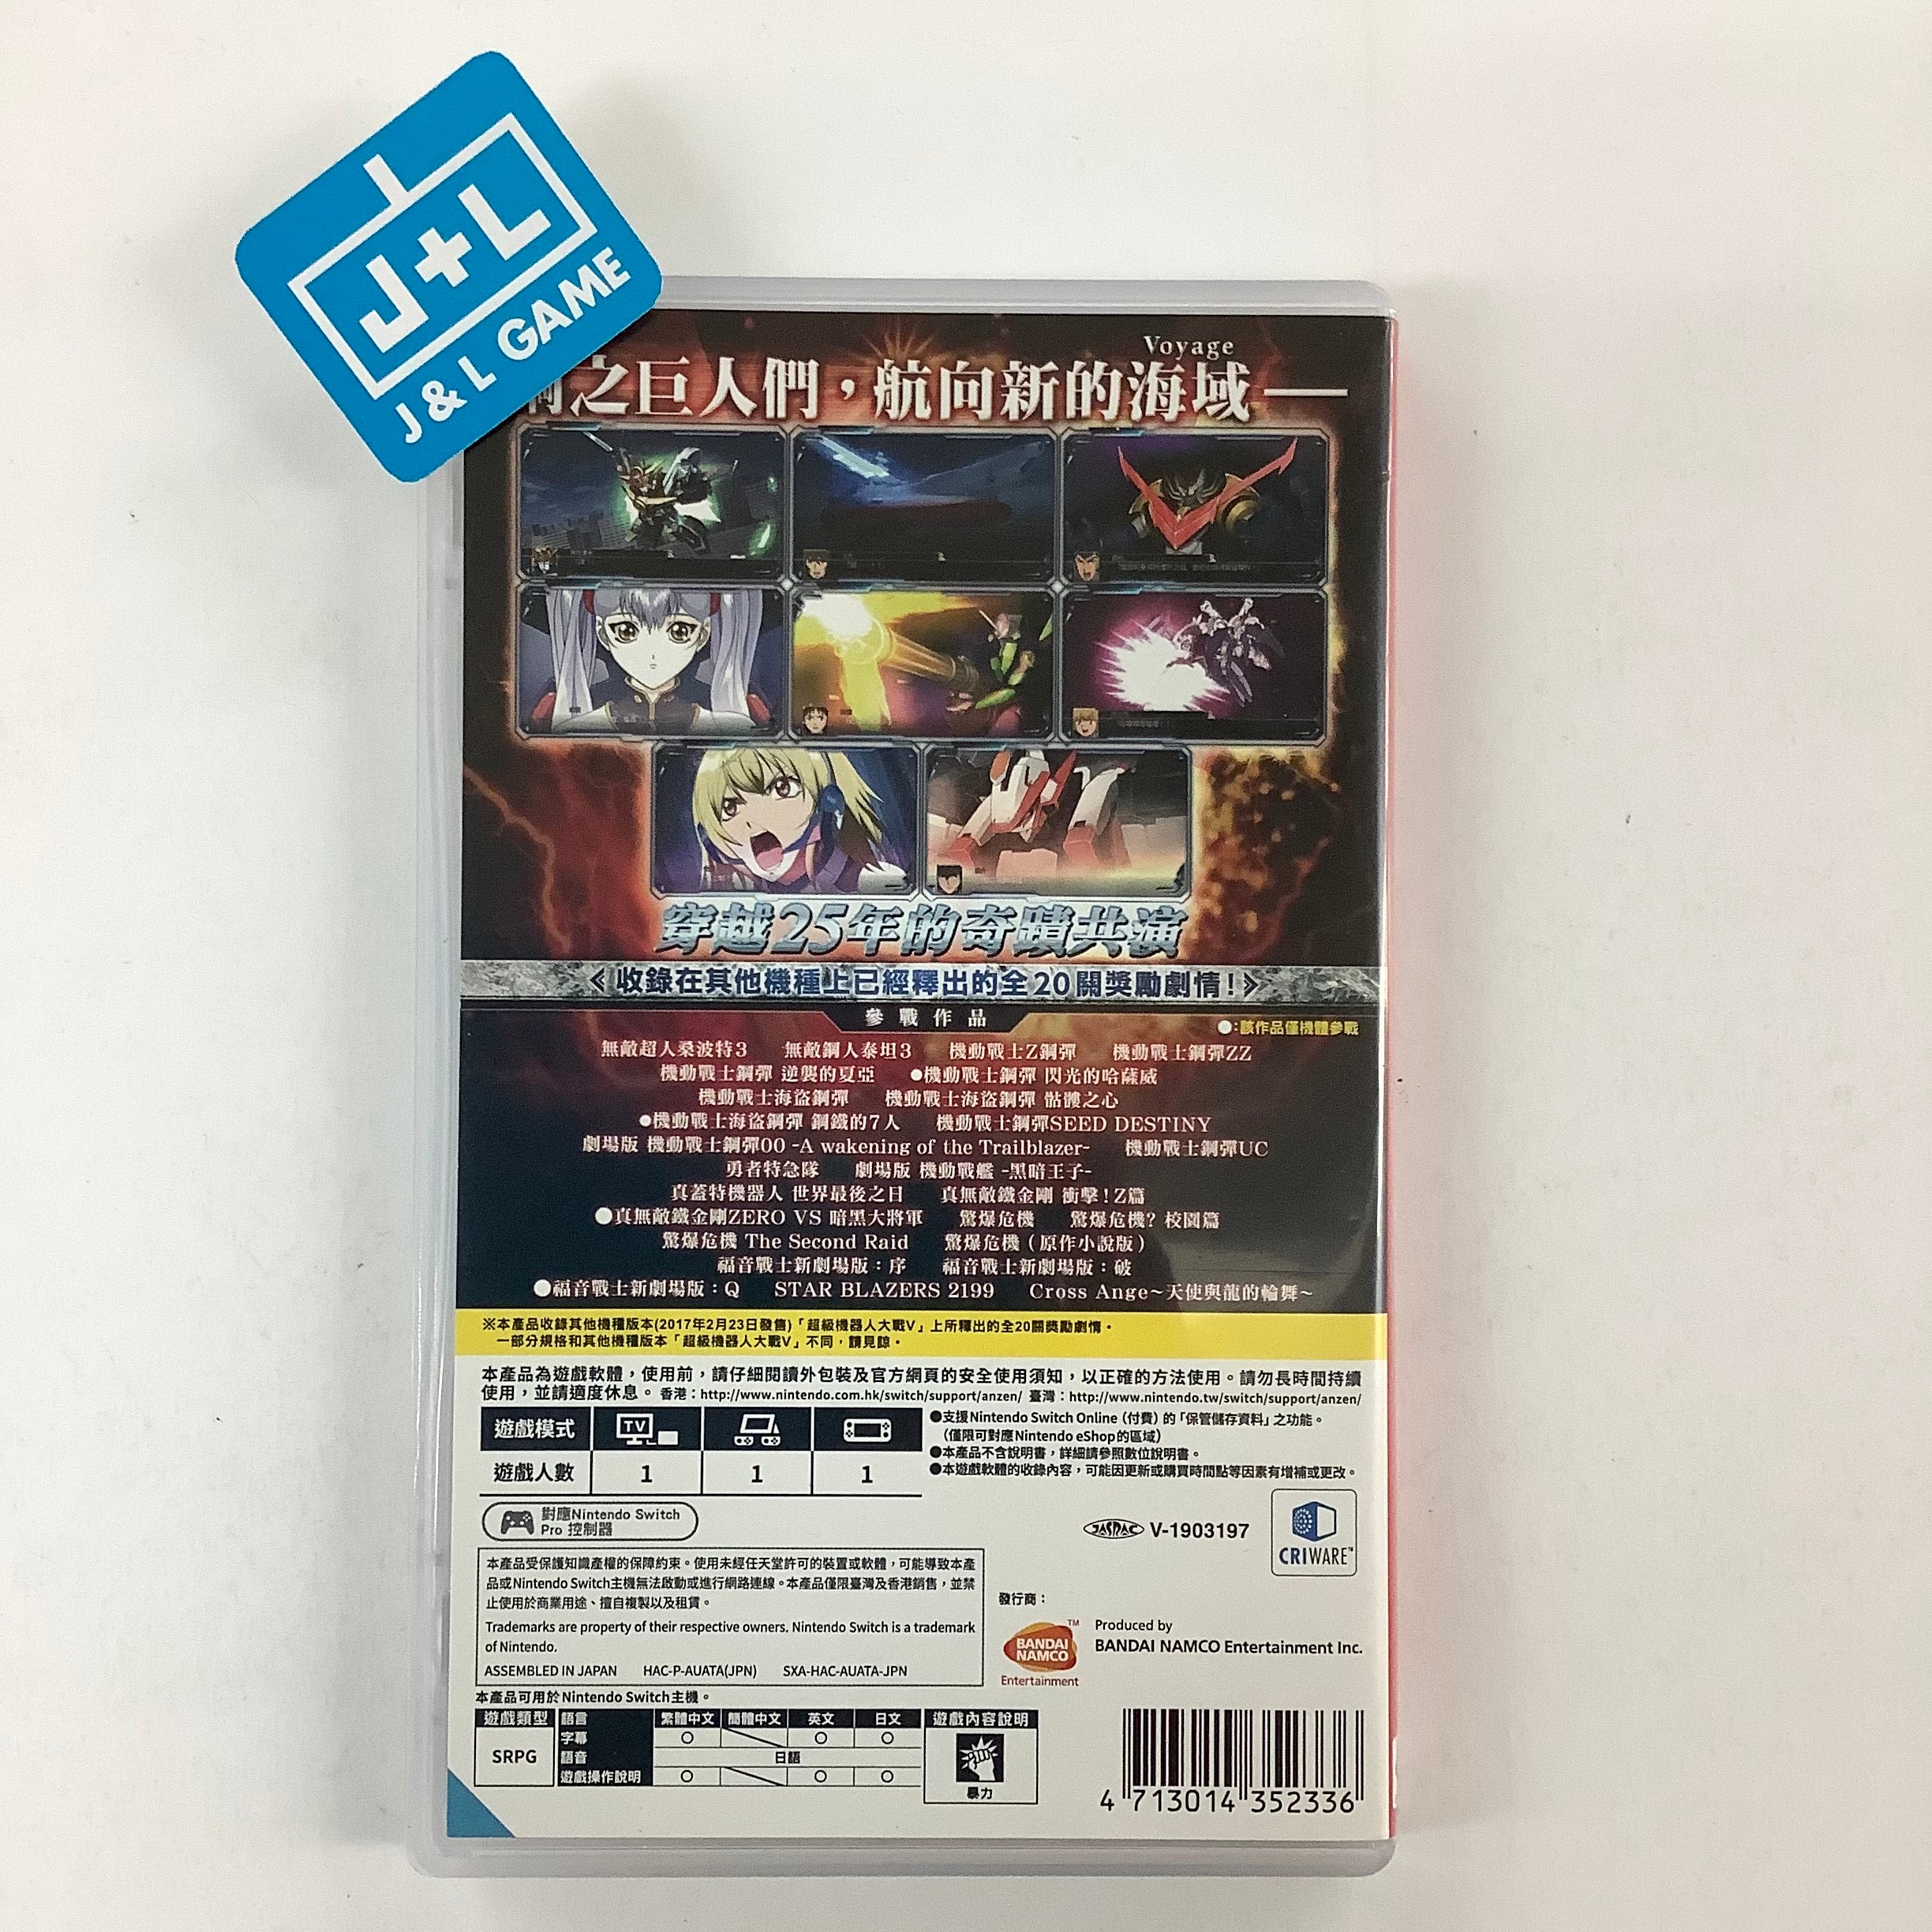 Super Robot Wars V - (NSW) Nintendo Switch [Pre-Owned] (Asia Import) Video Games Bandai Namco Games   